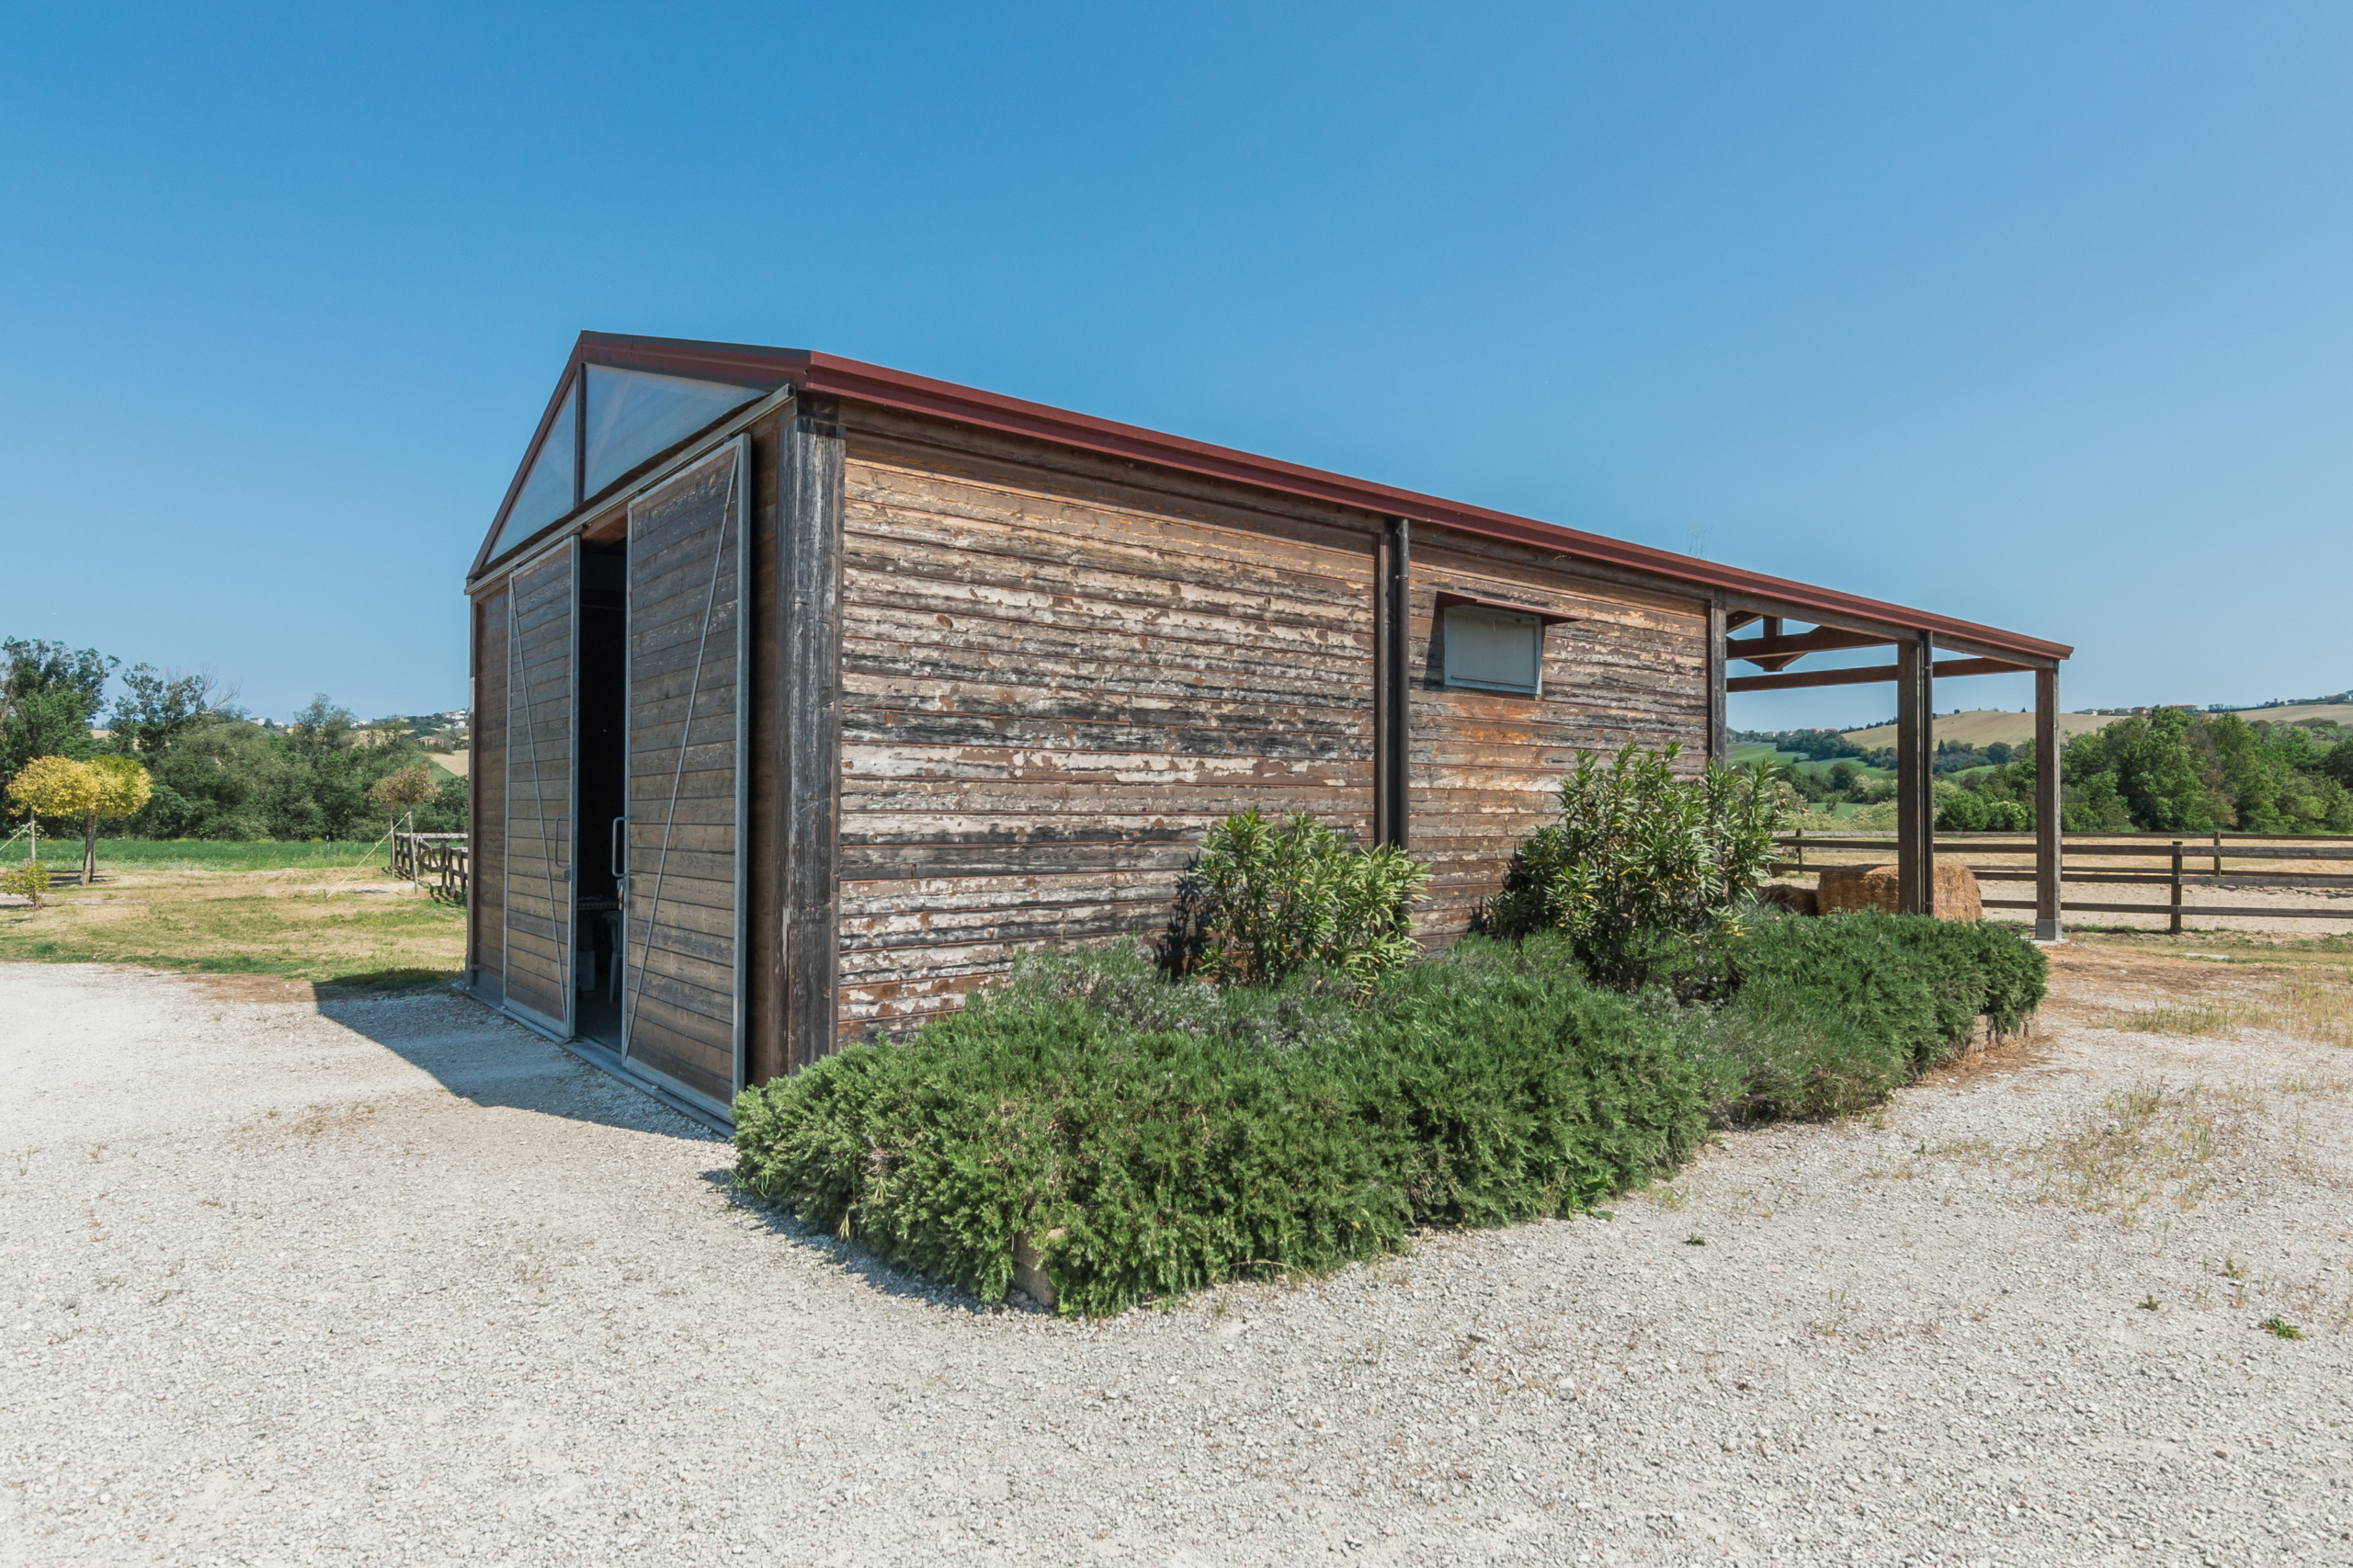 Country house with stables in Le Marche